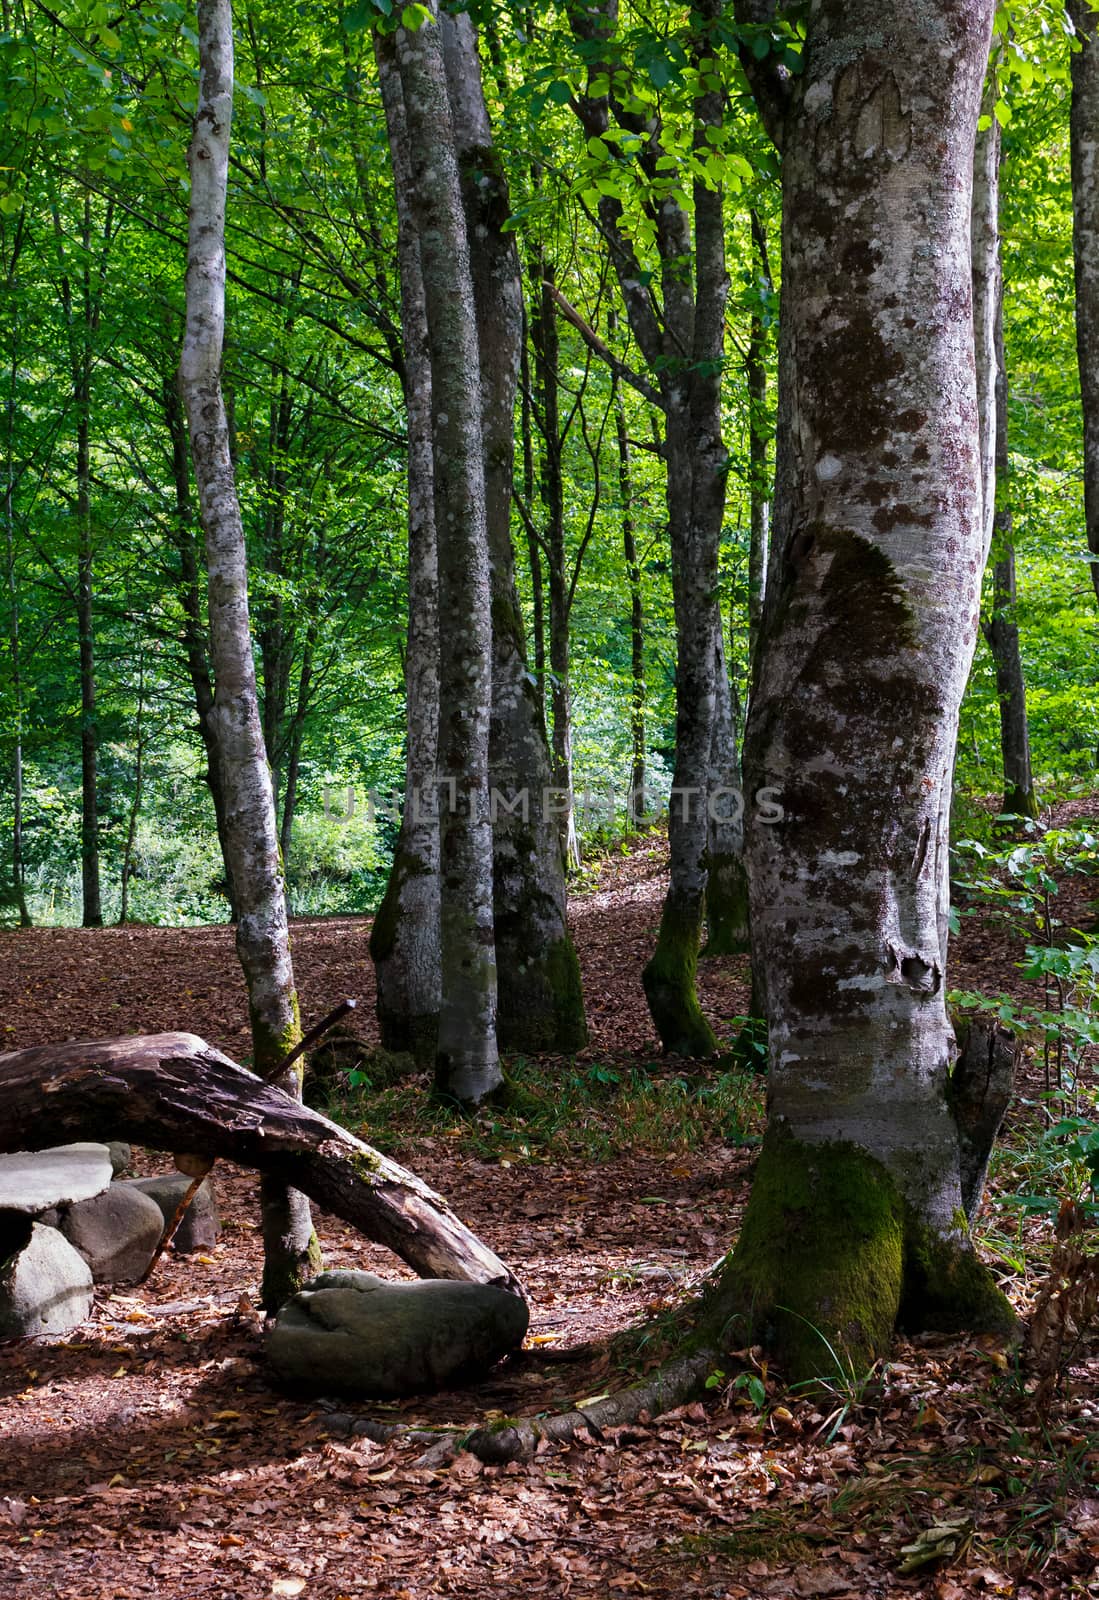 beech forest in summer. lovely nature scenery with green foliage